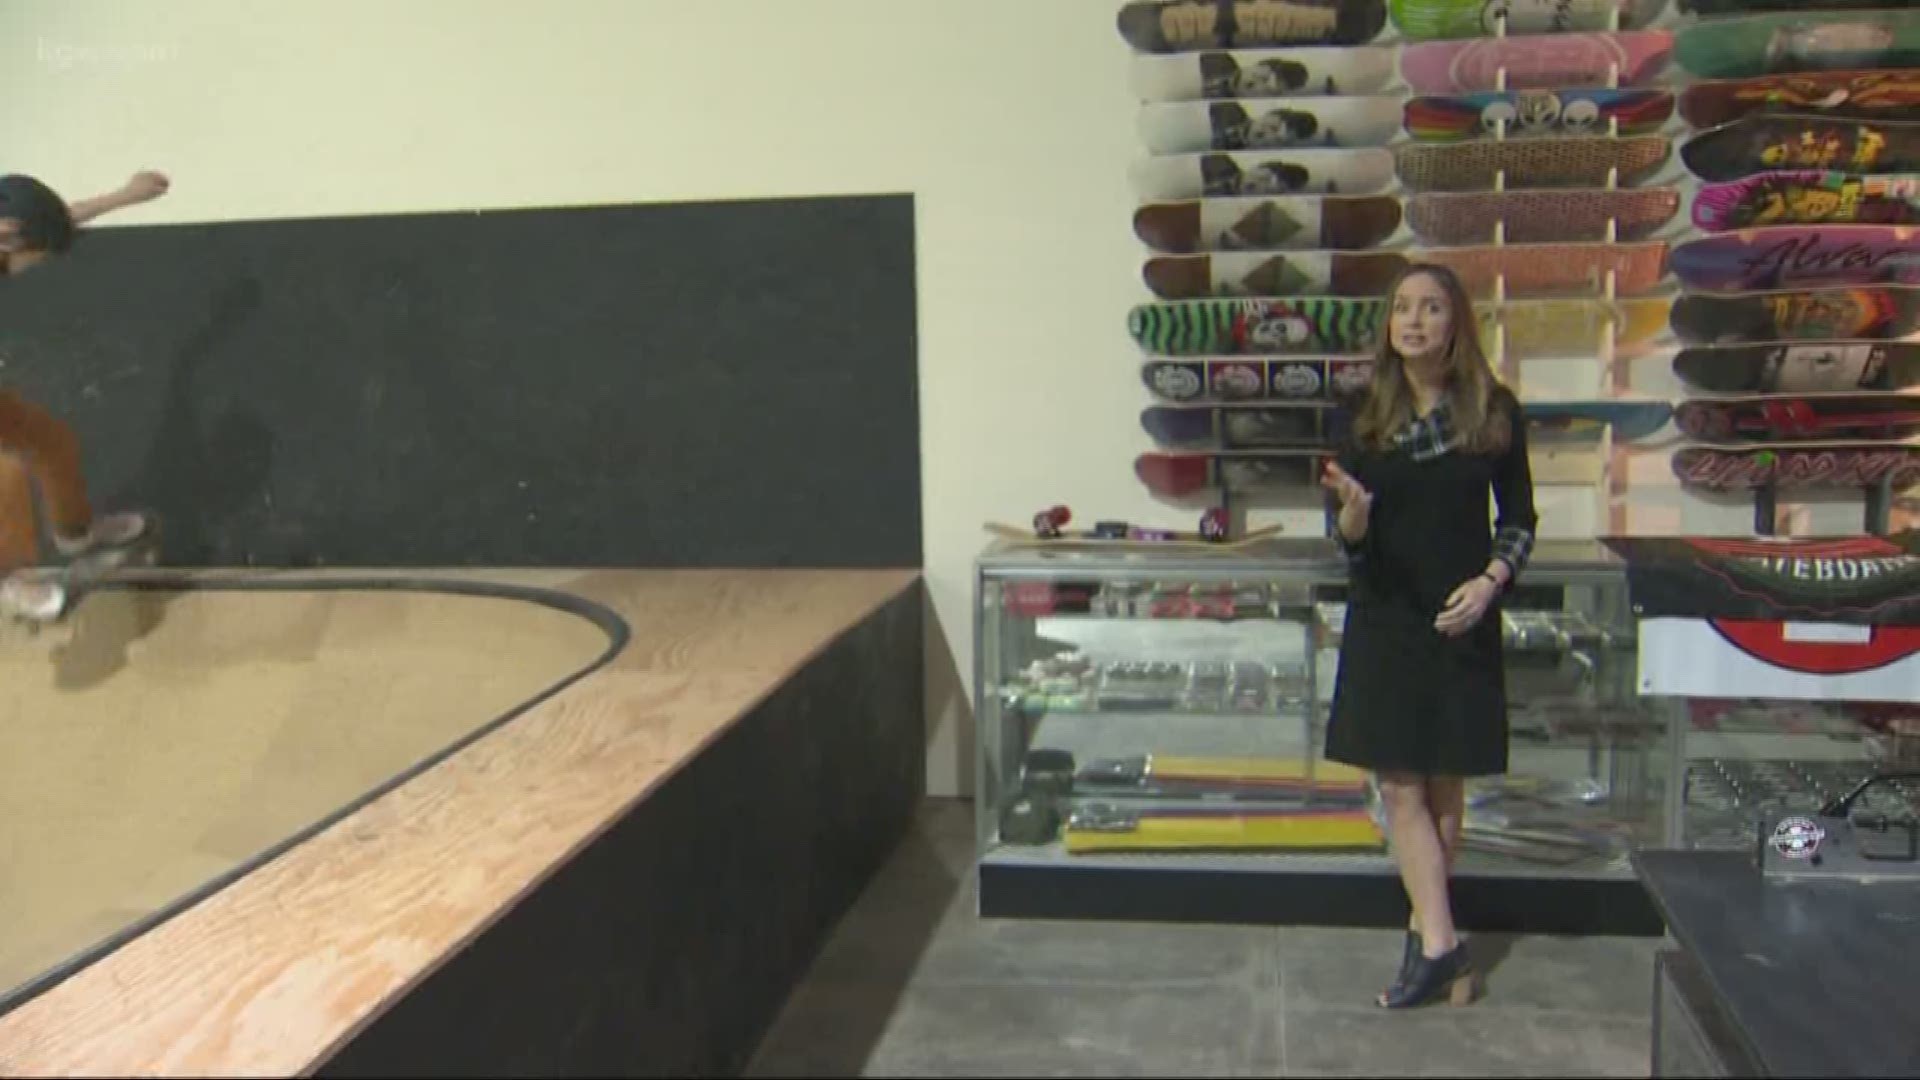 There’s a new indoor skate park in Washougal. Katherine Cook takes us inside.